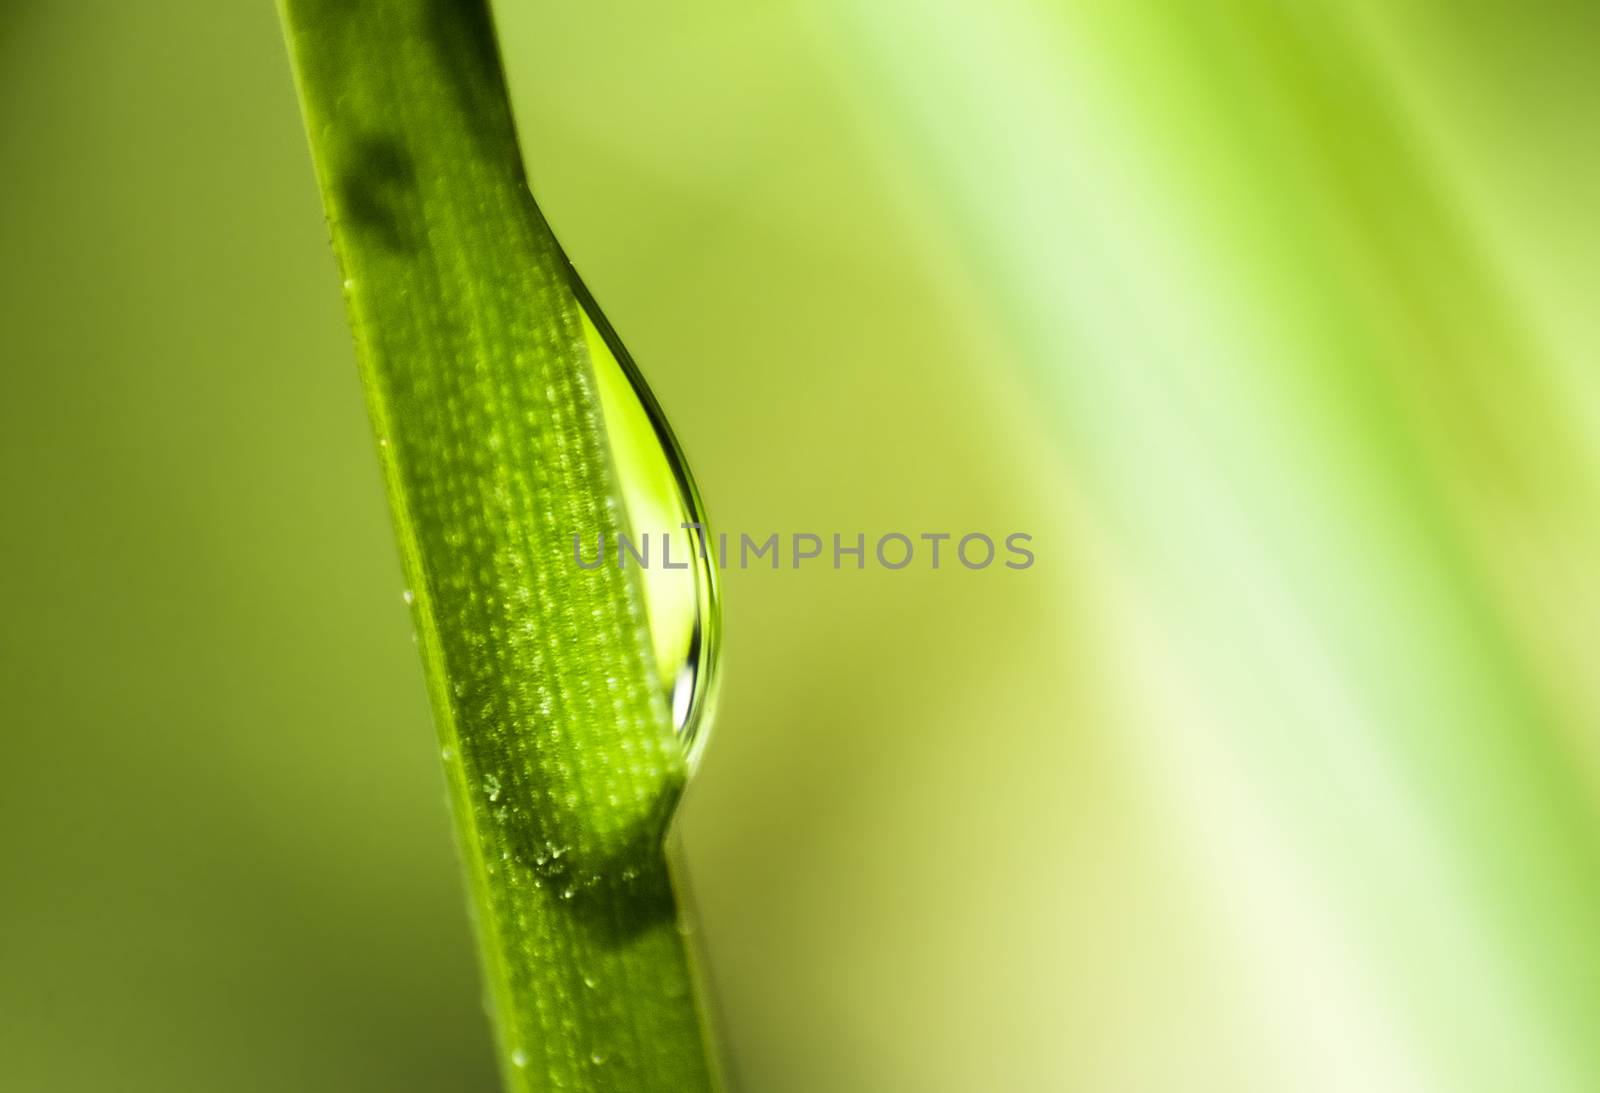 water droplet extremely close up on grass by stockbp